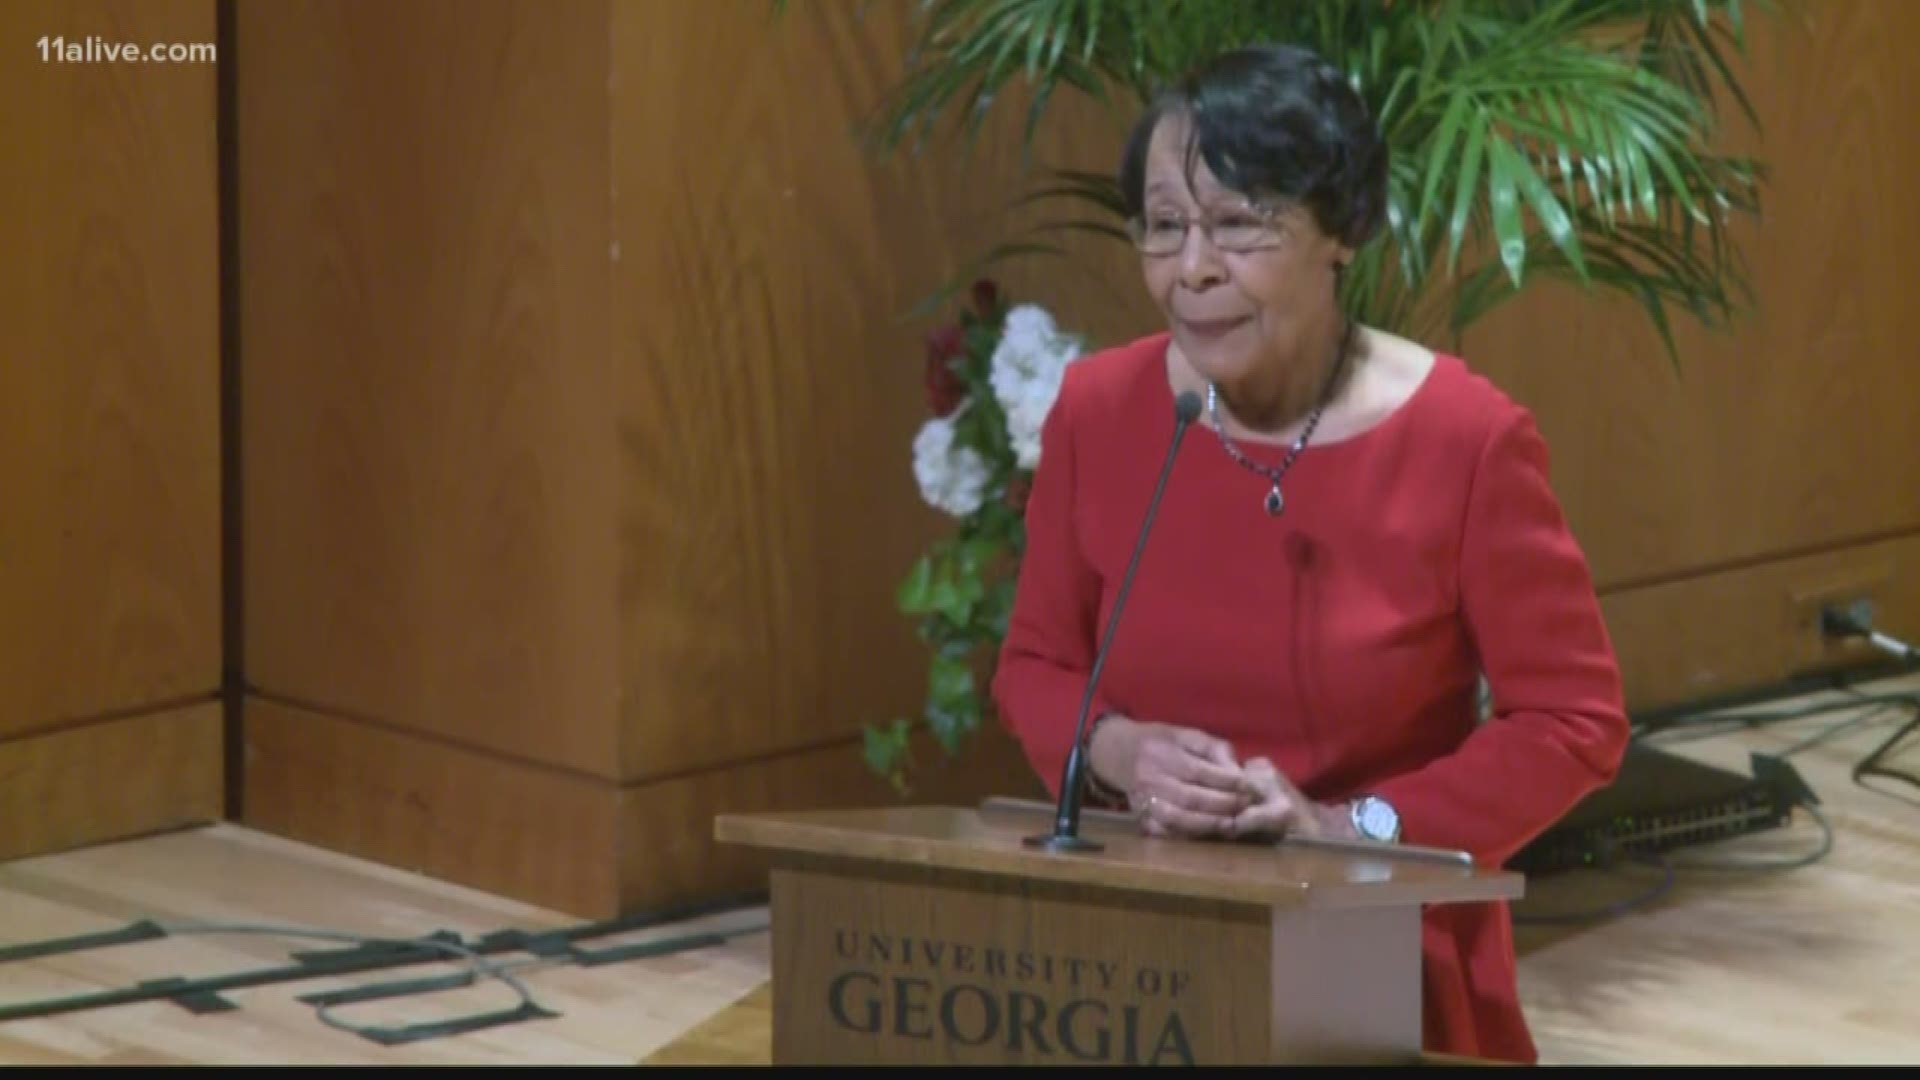 Mary Frances Early was the first black person to graduate from the University of Georgia back in 1962.